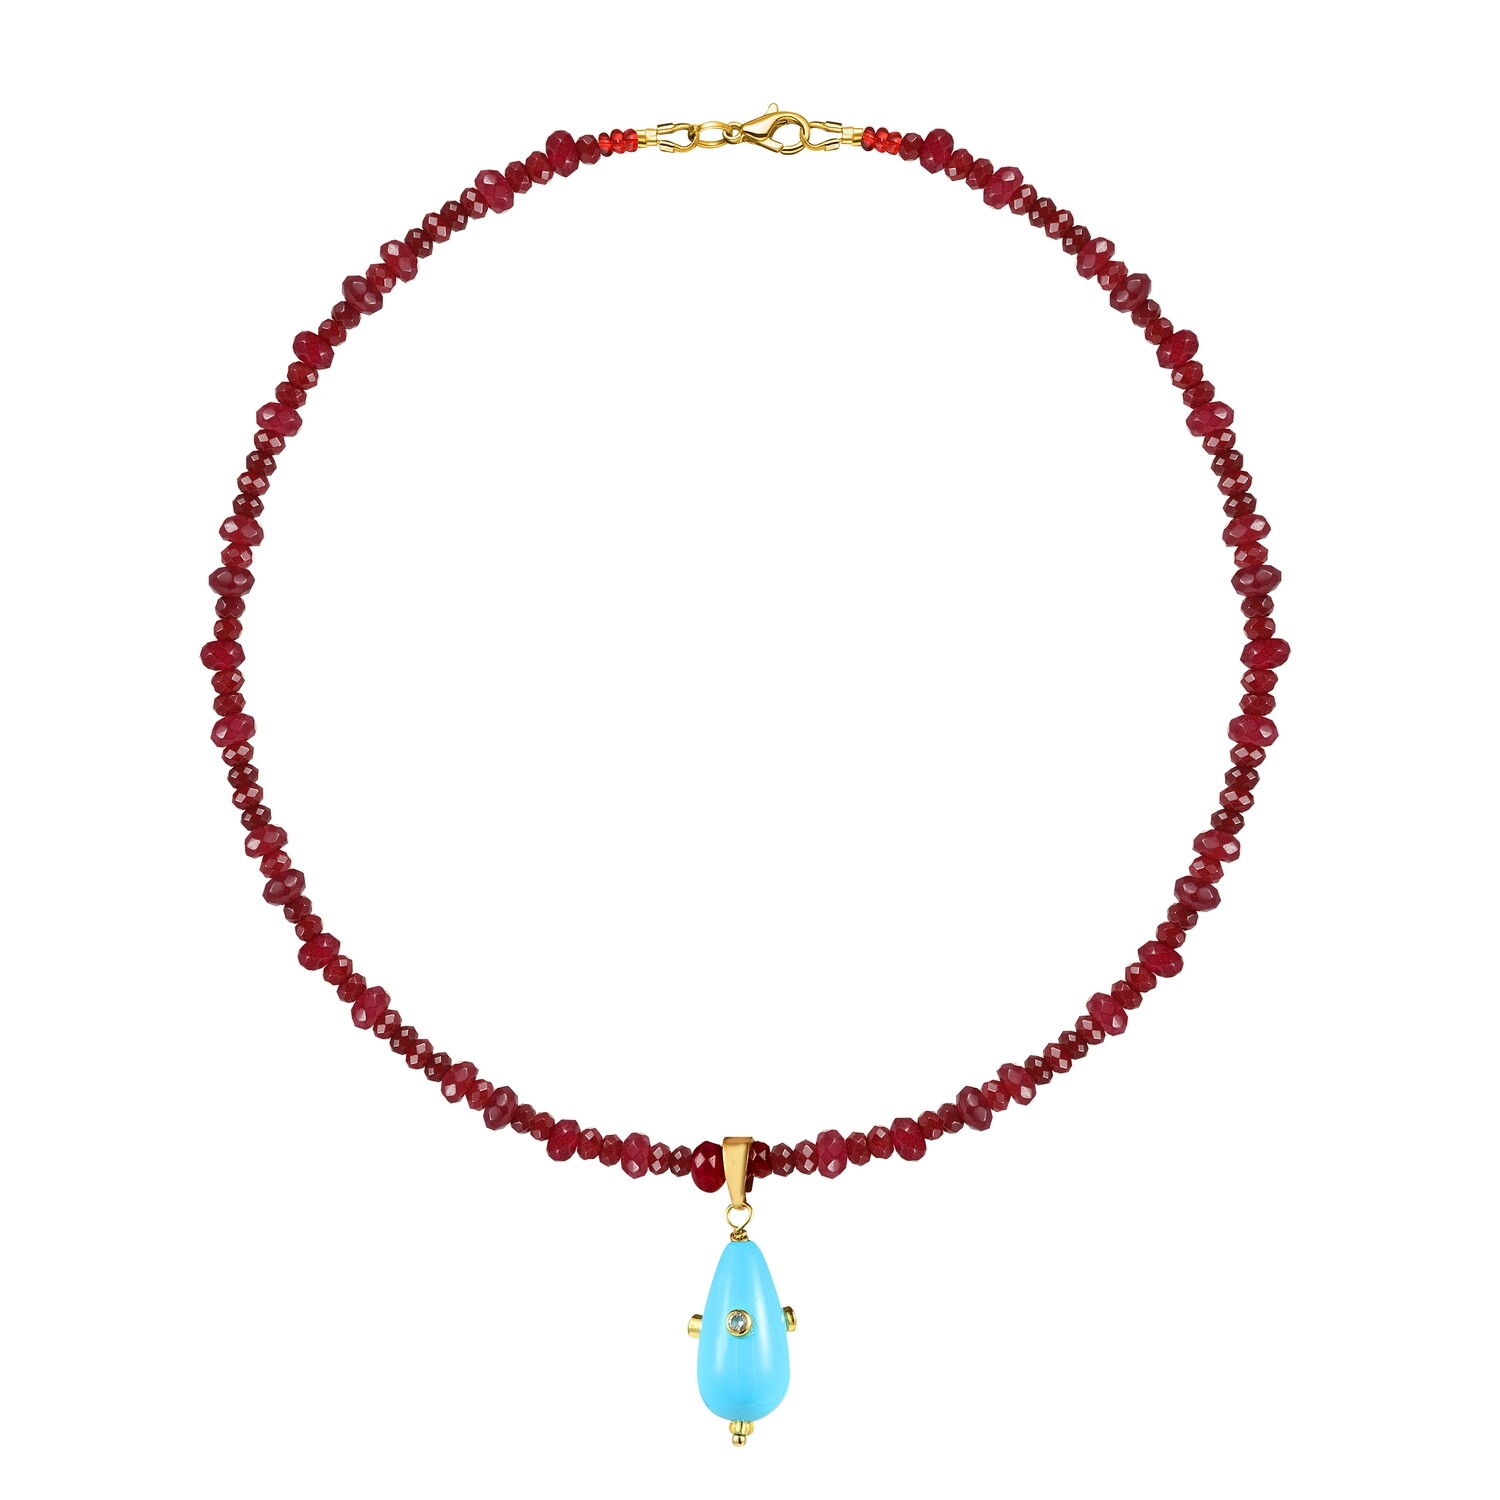 Ruby Necklace with Pendant